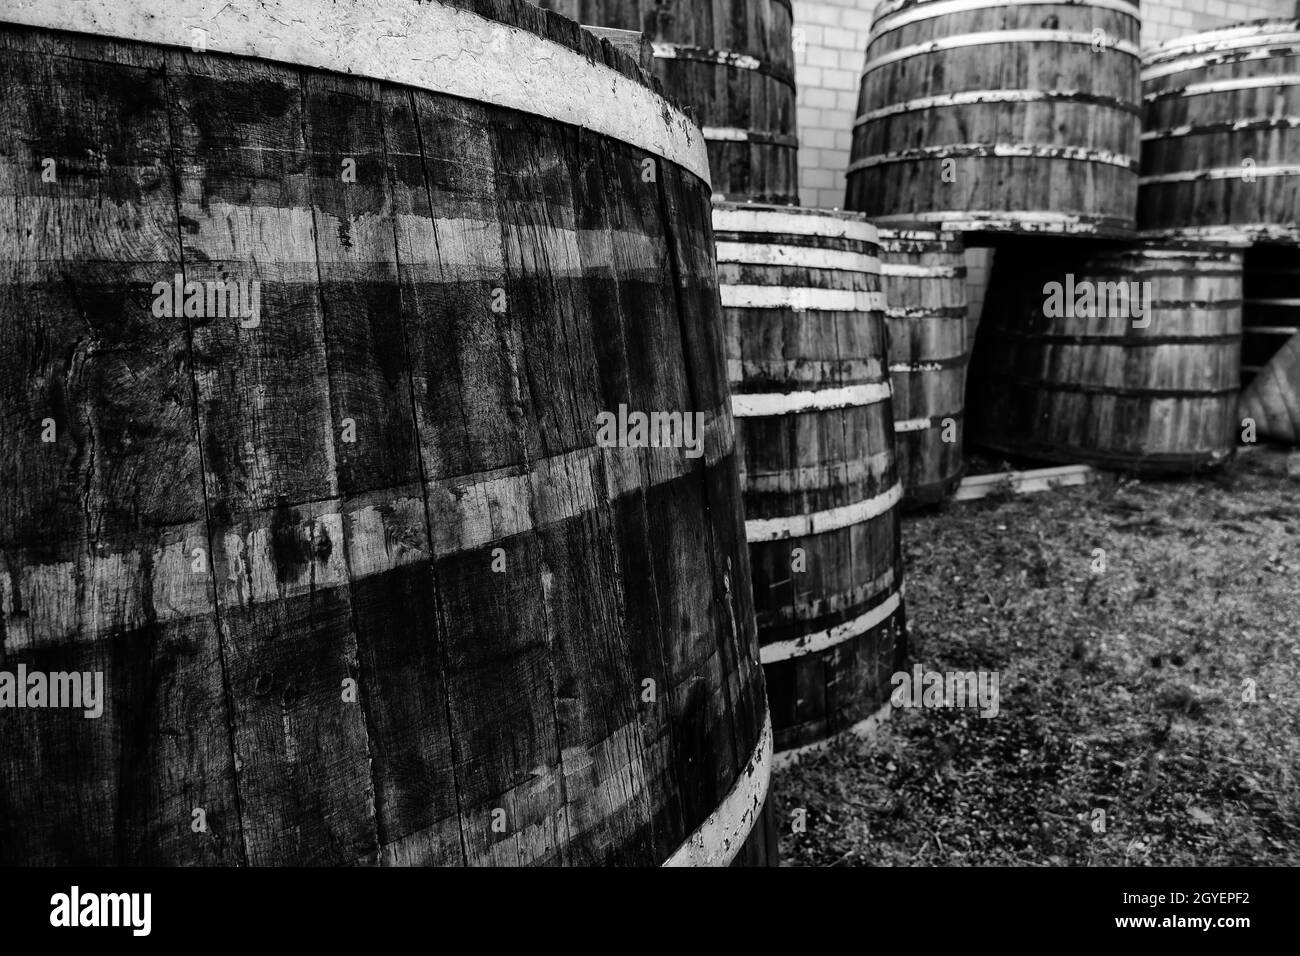 Detail of old containers for alcoholic beverages, wine culture, transportation and conservation Stock Photo